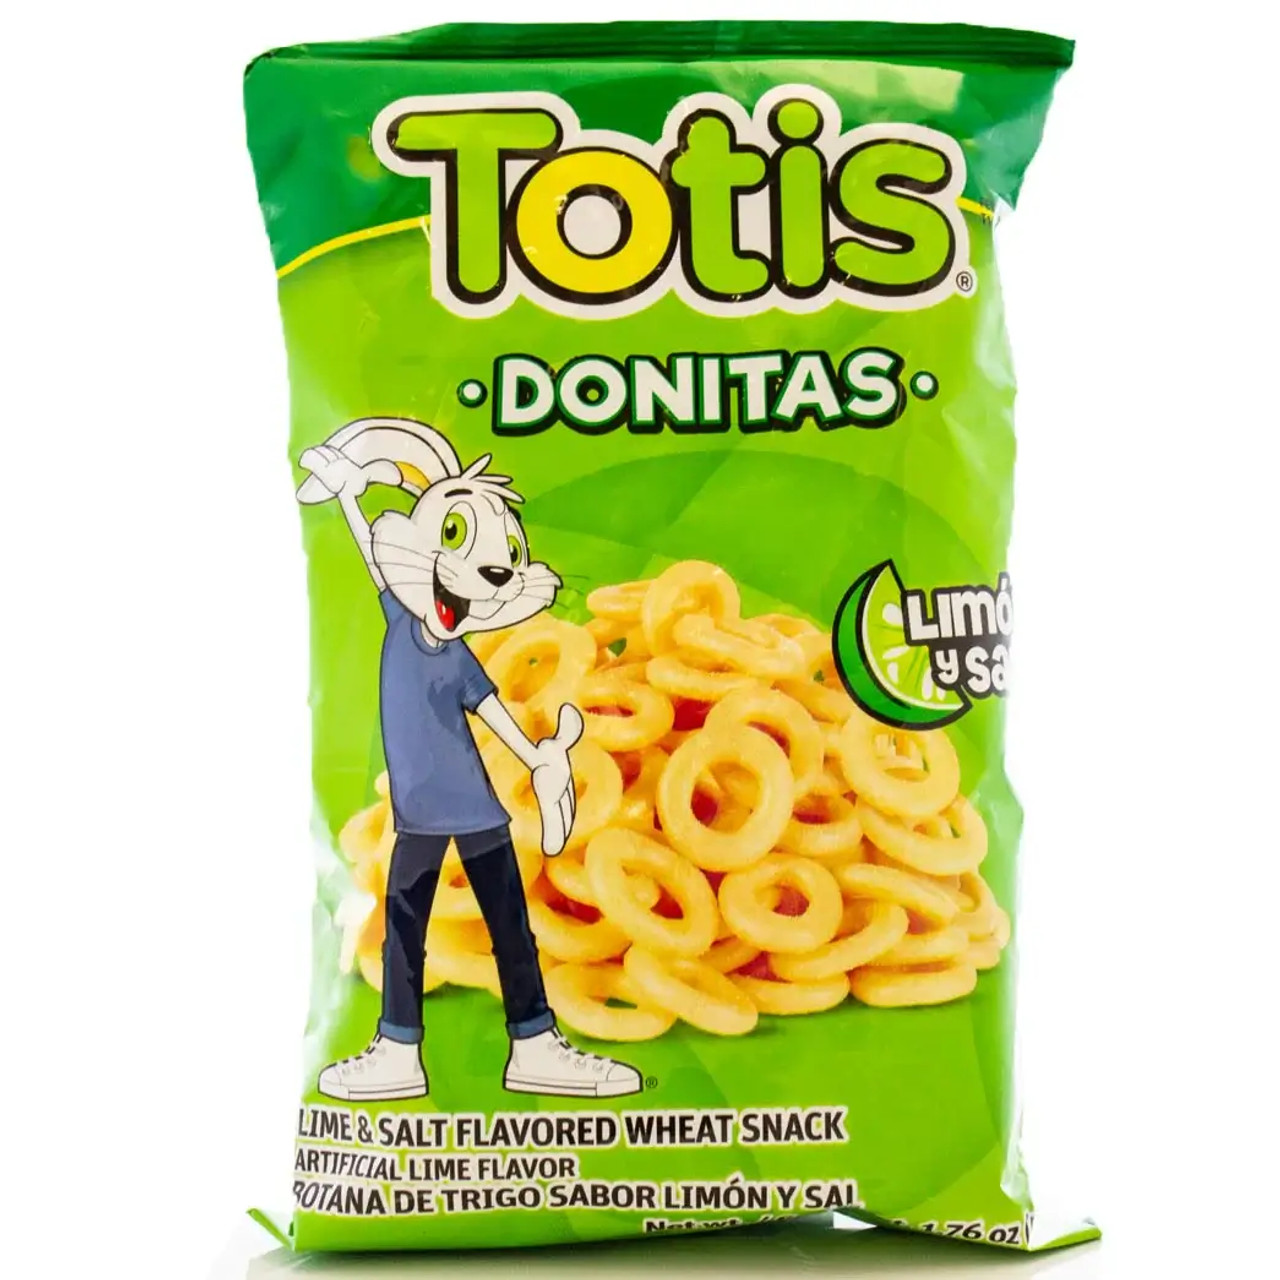 Totis Donita Con Salt & Lime 50 g/(24-Case) - Zesty Wheat Snacks Infused with Salt and Lime Flavor
-Chicken Pieces